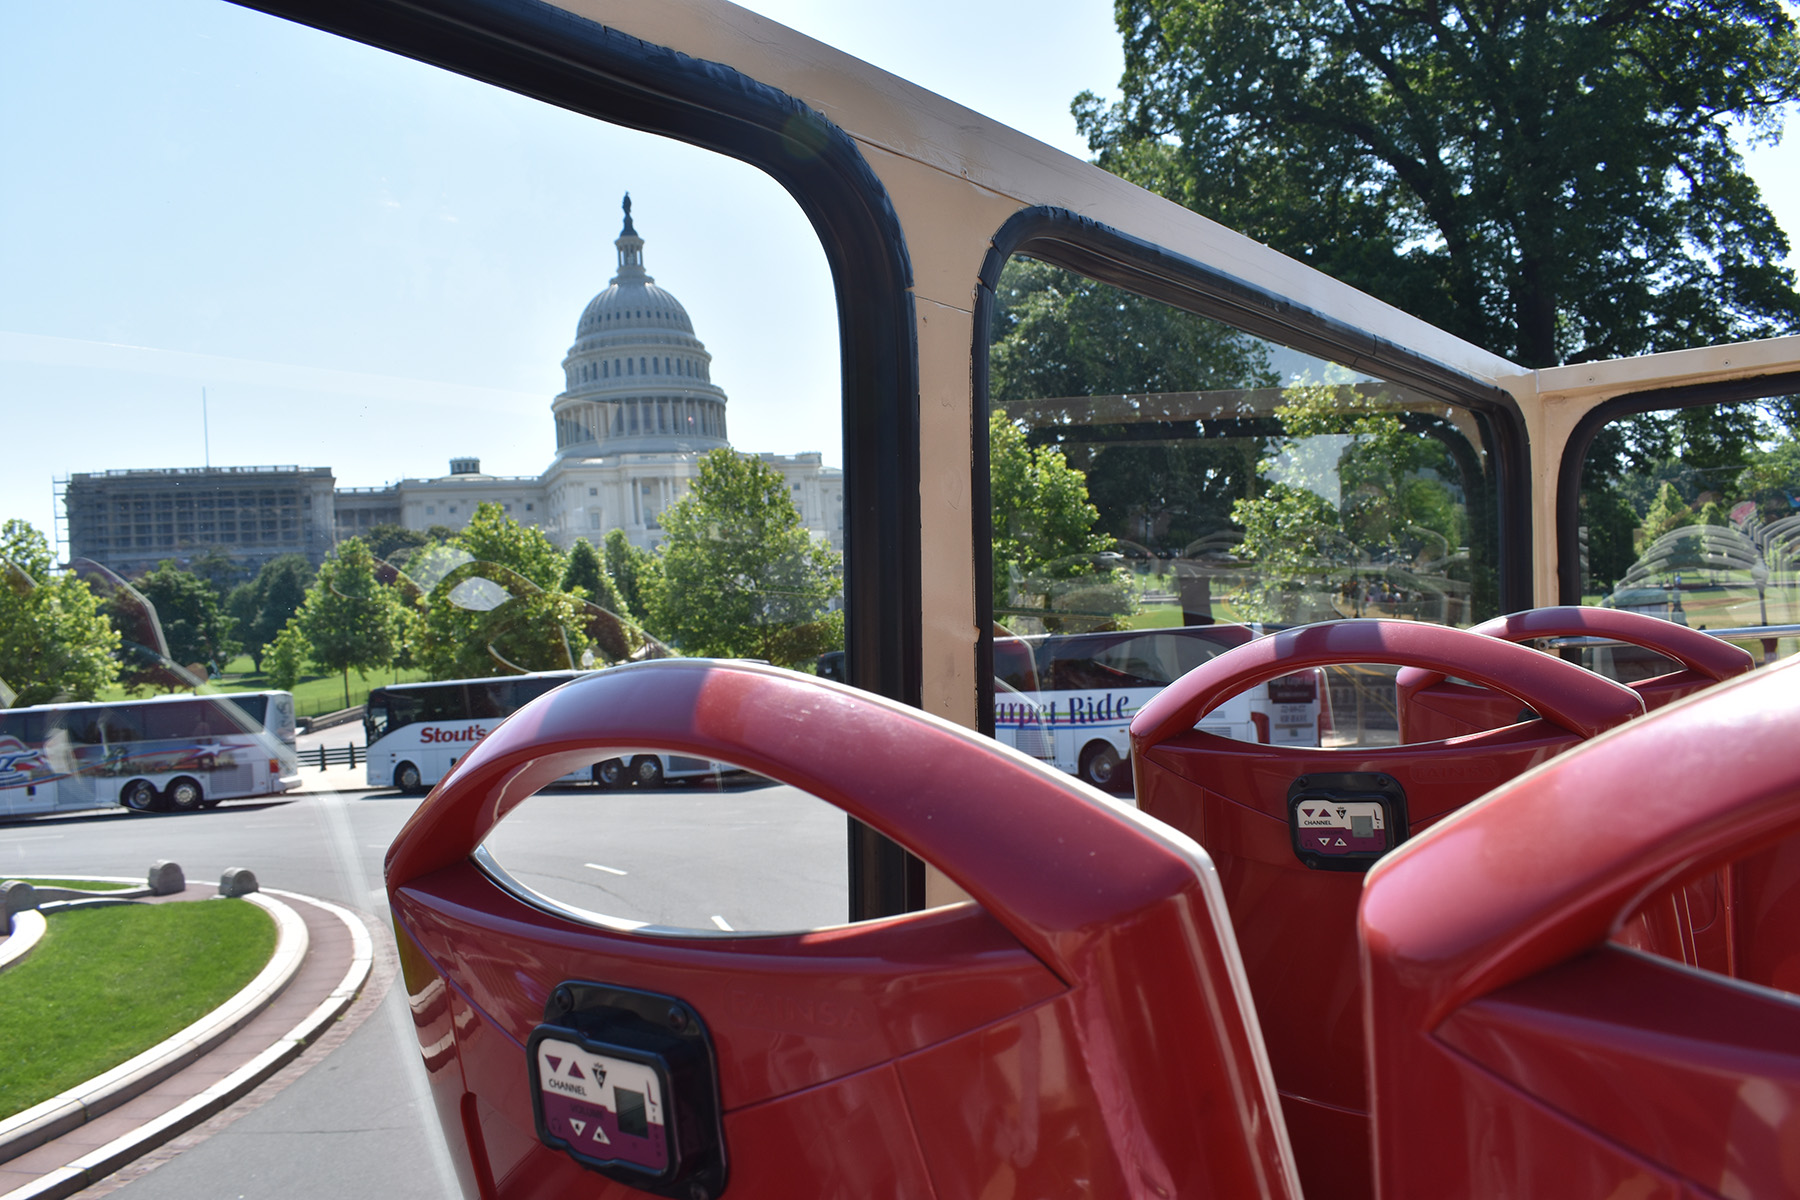 Big Bus with view of Capitol Building